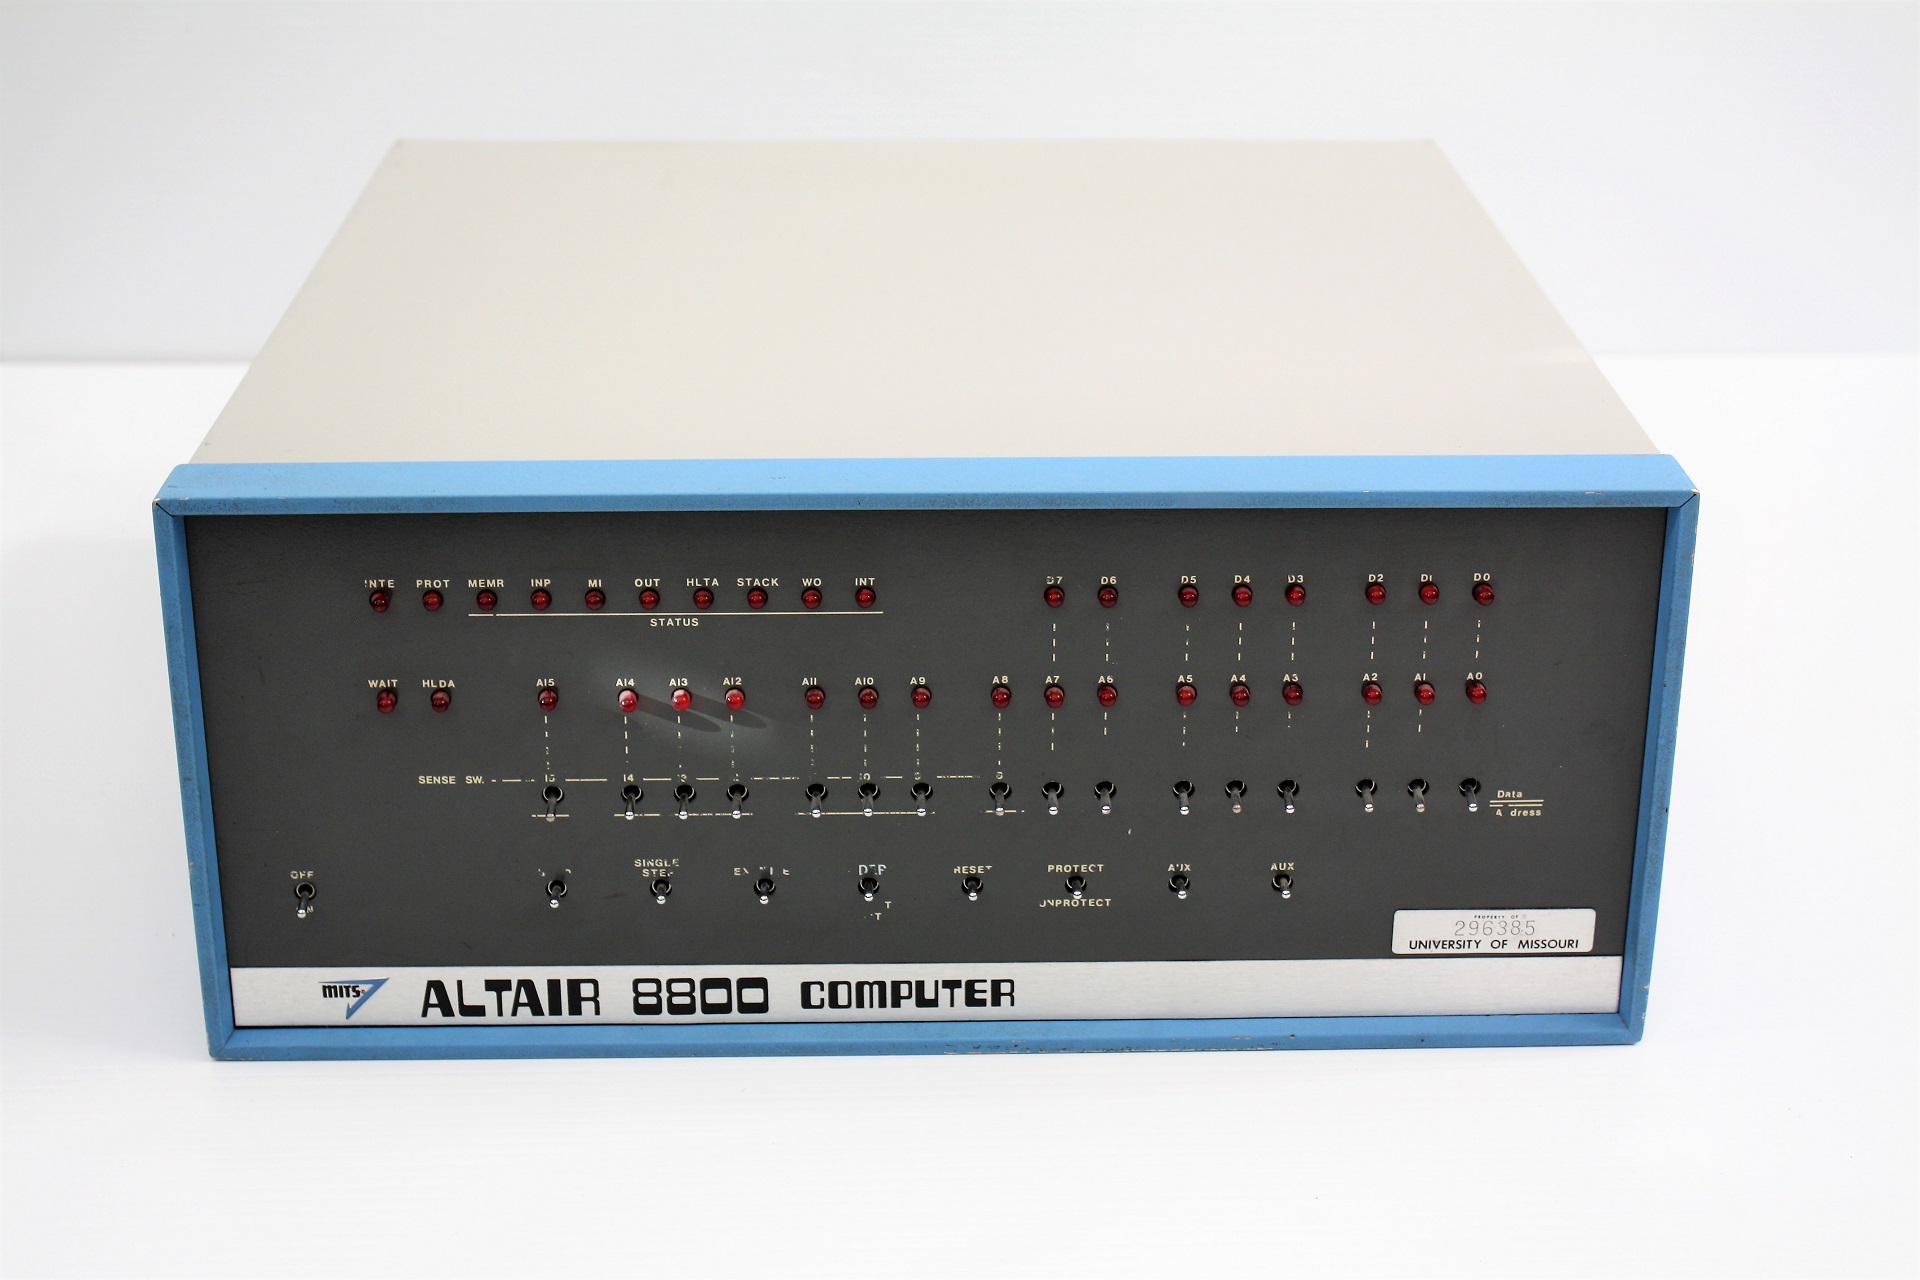 MITS Altair 8800 lost and found – VintageComputer.ca